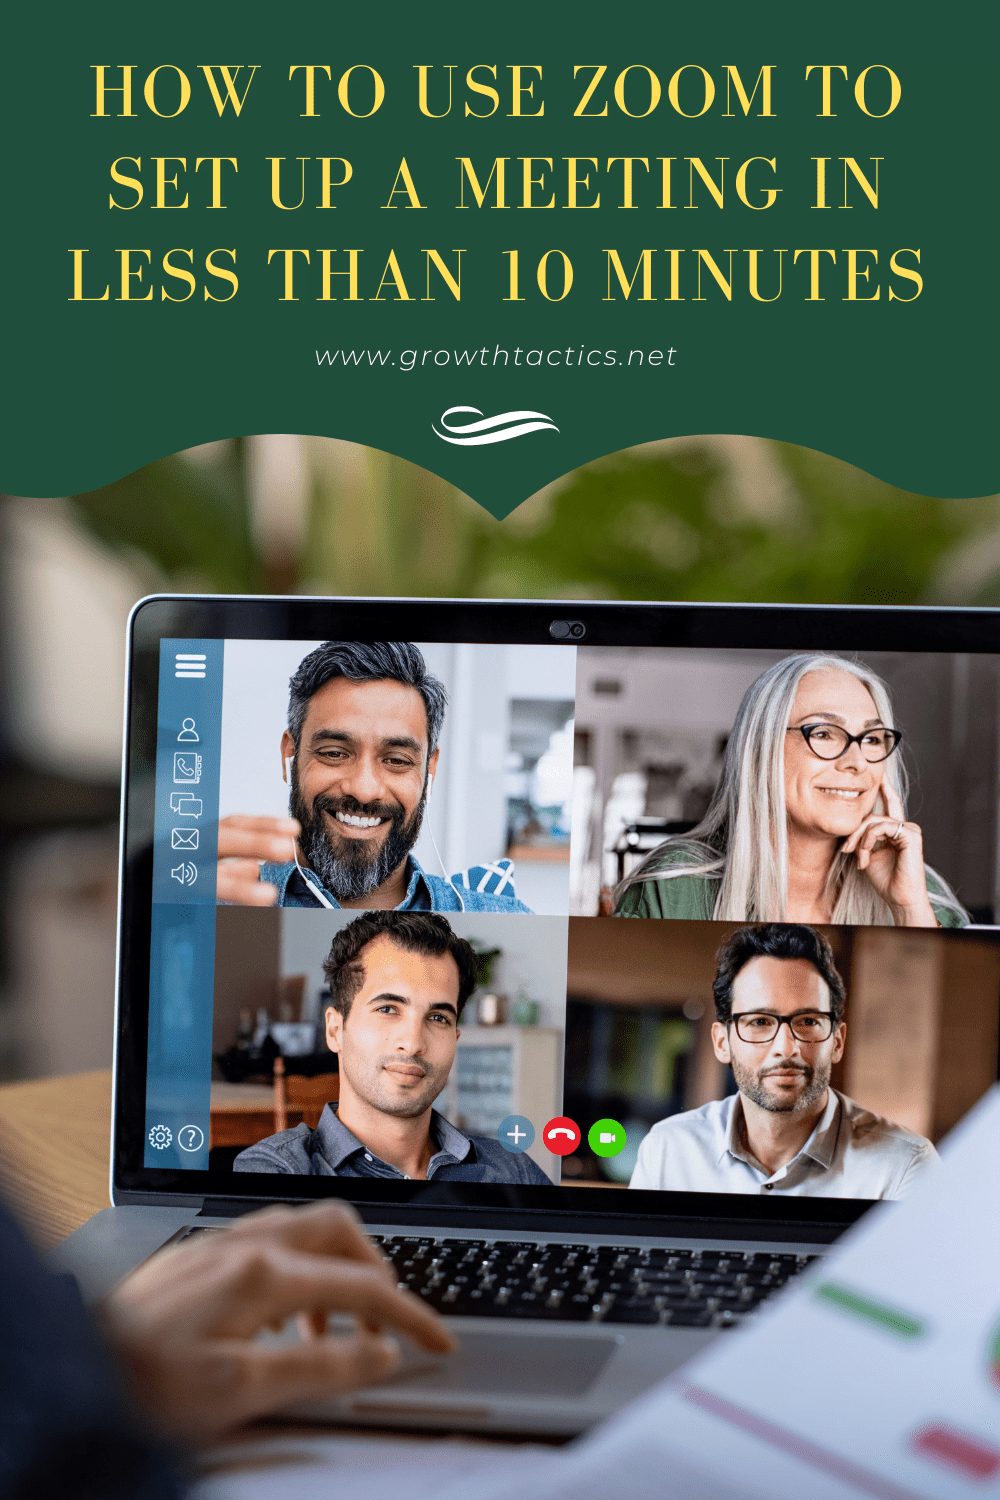 How to Use Zoom to Set up a Meeting in Less Than 10 Minutes